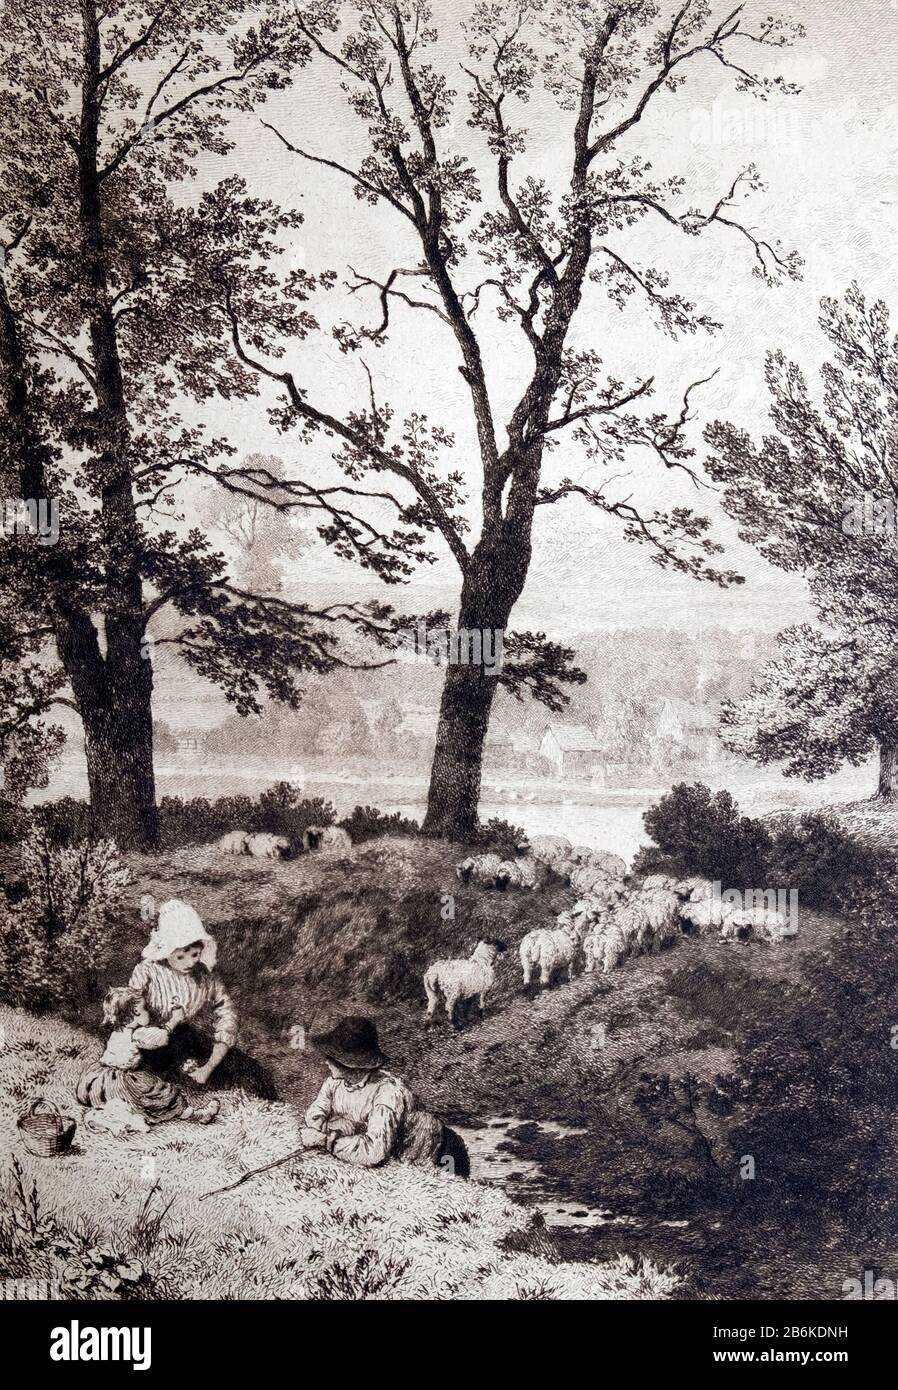 Myles Birket Foster engraving little children and sheep in a rustic rural landscape 'The Little Shepherds' Stock Photo